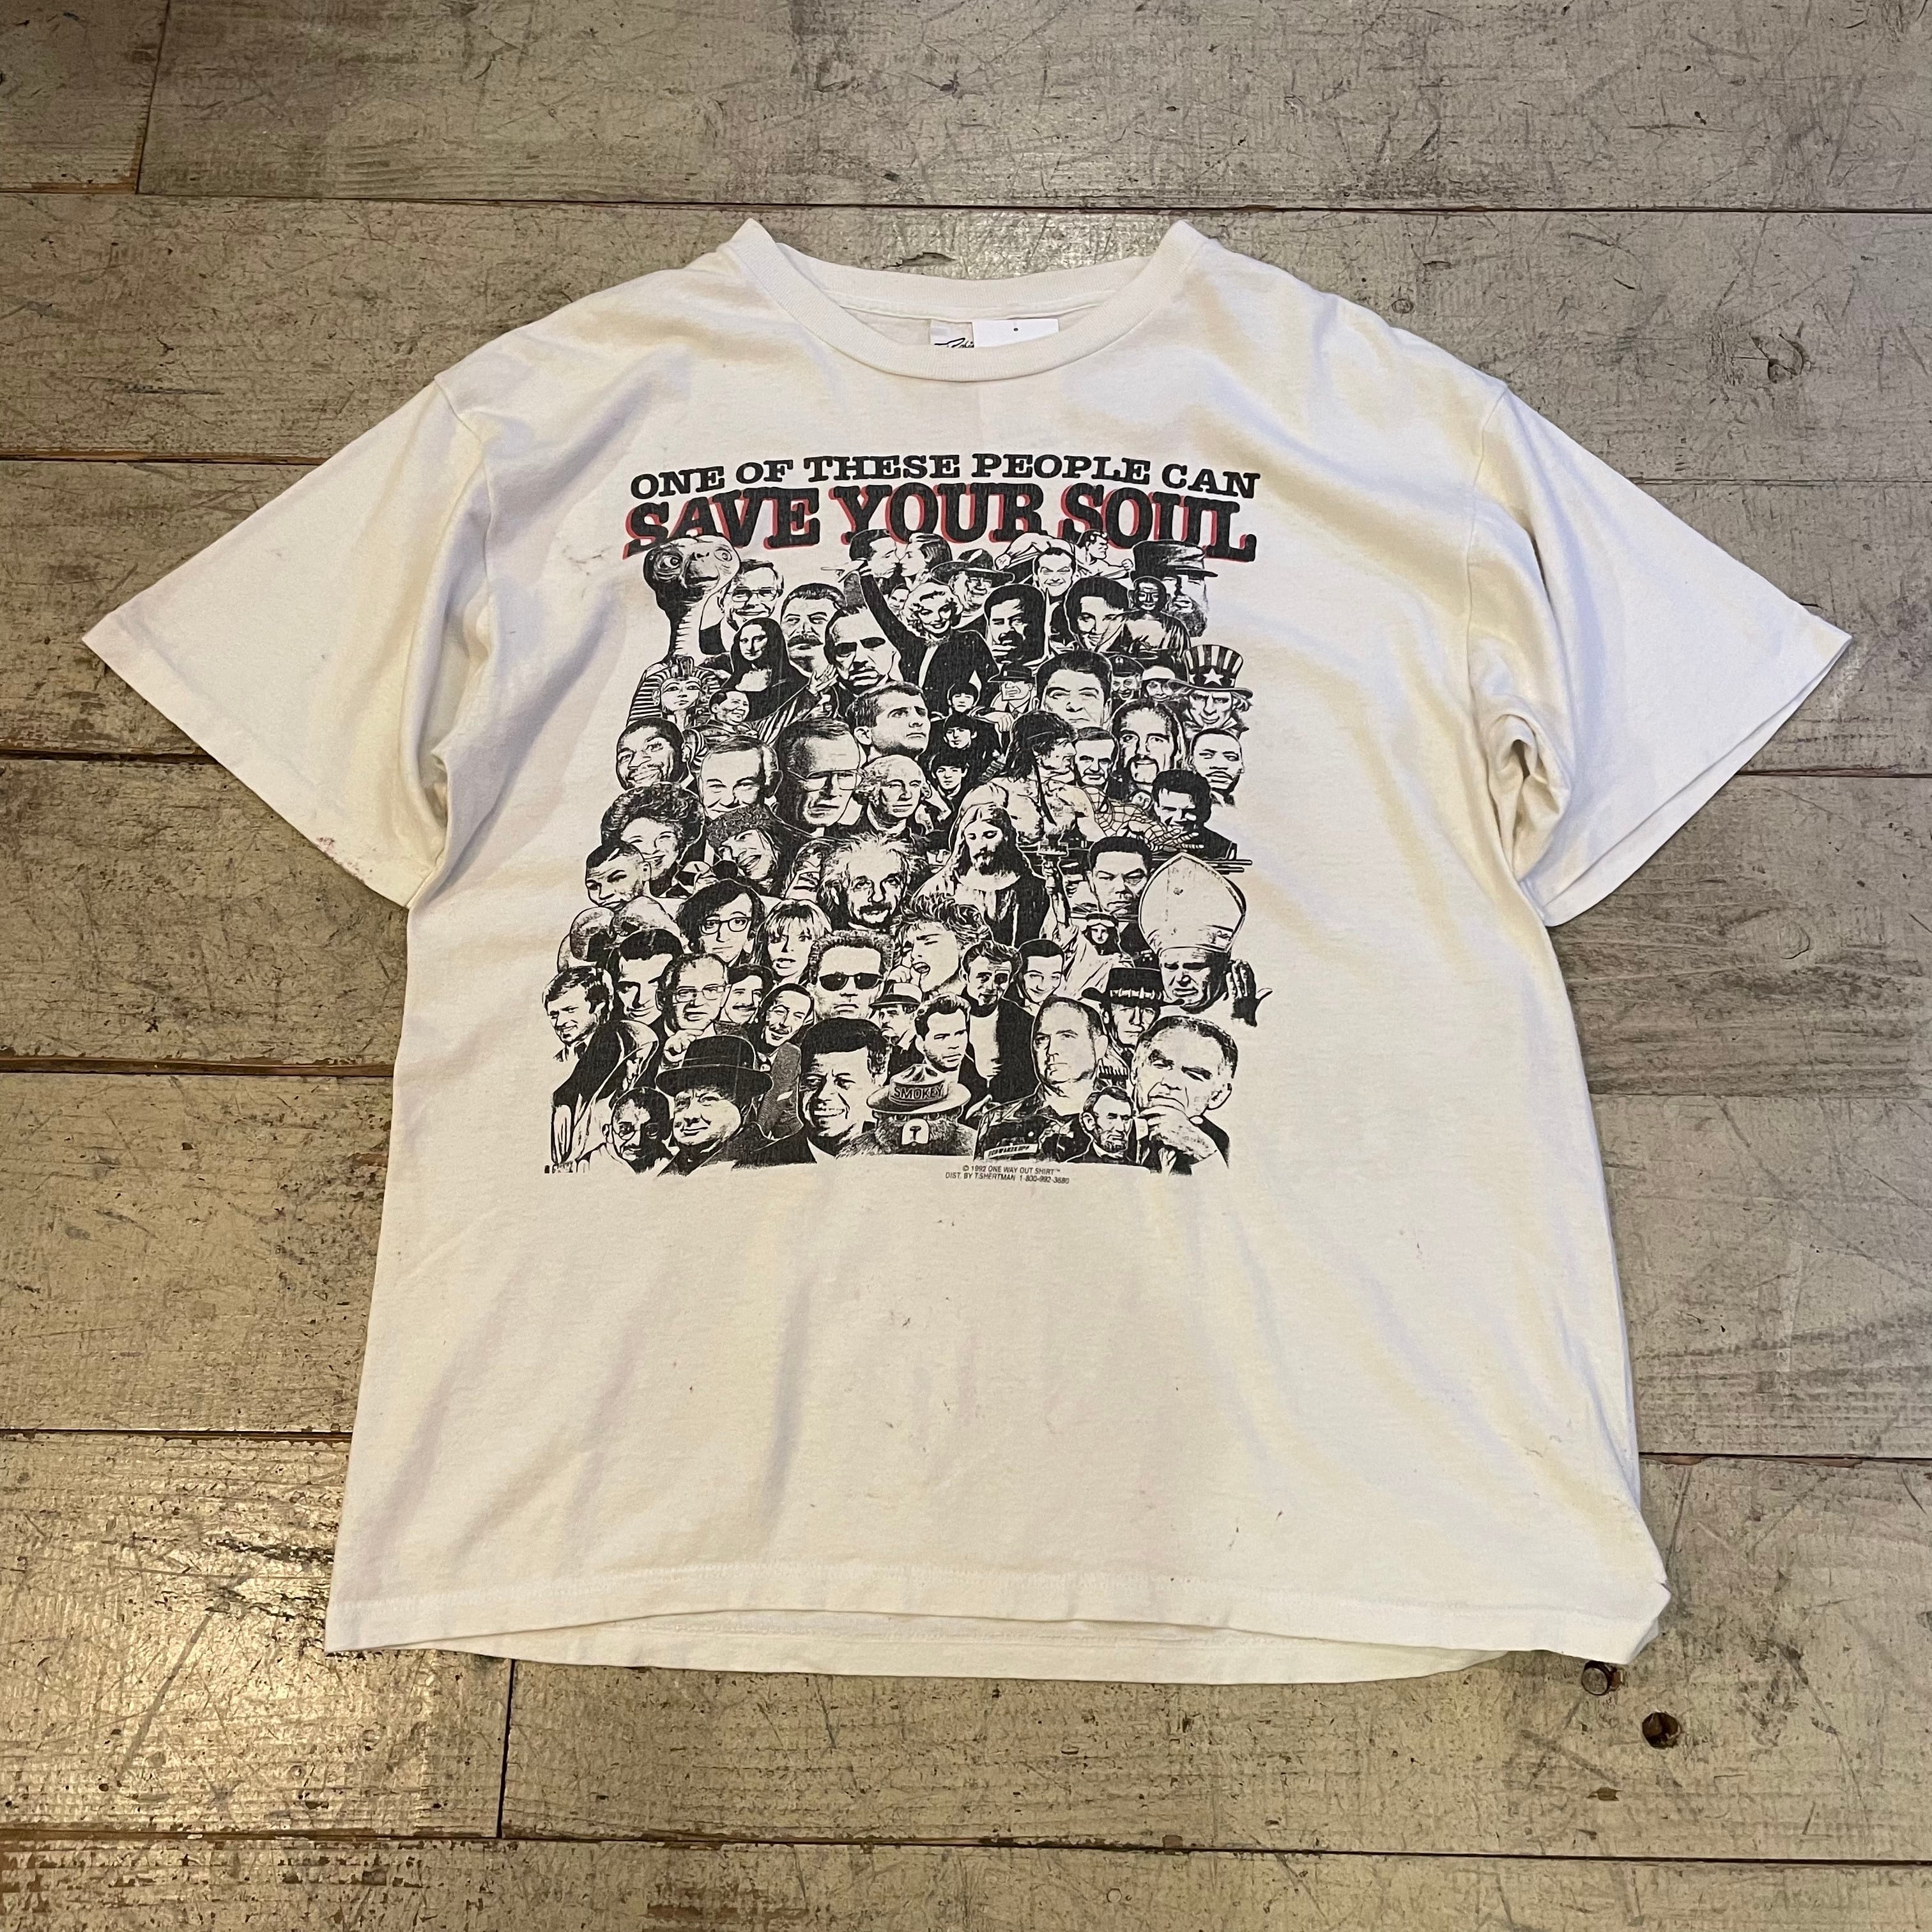 SAVE YOUR SOUL 偉人 キャラ Tシャツ 90s